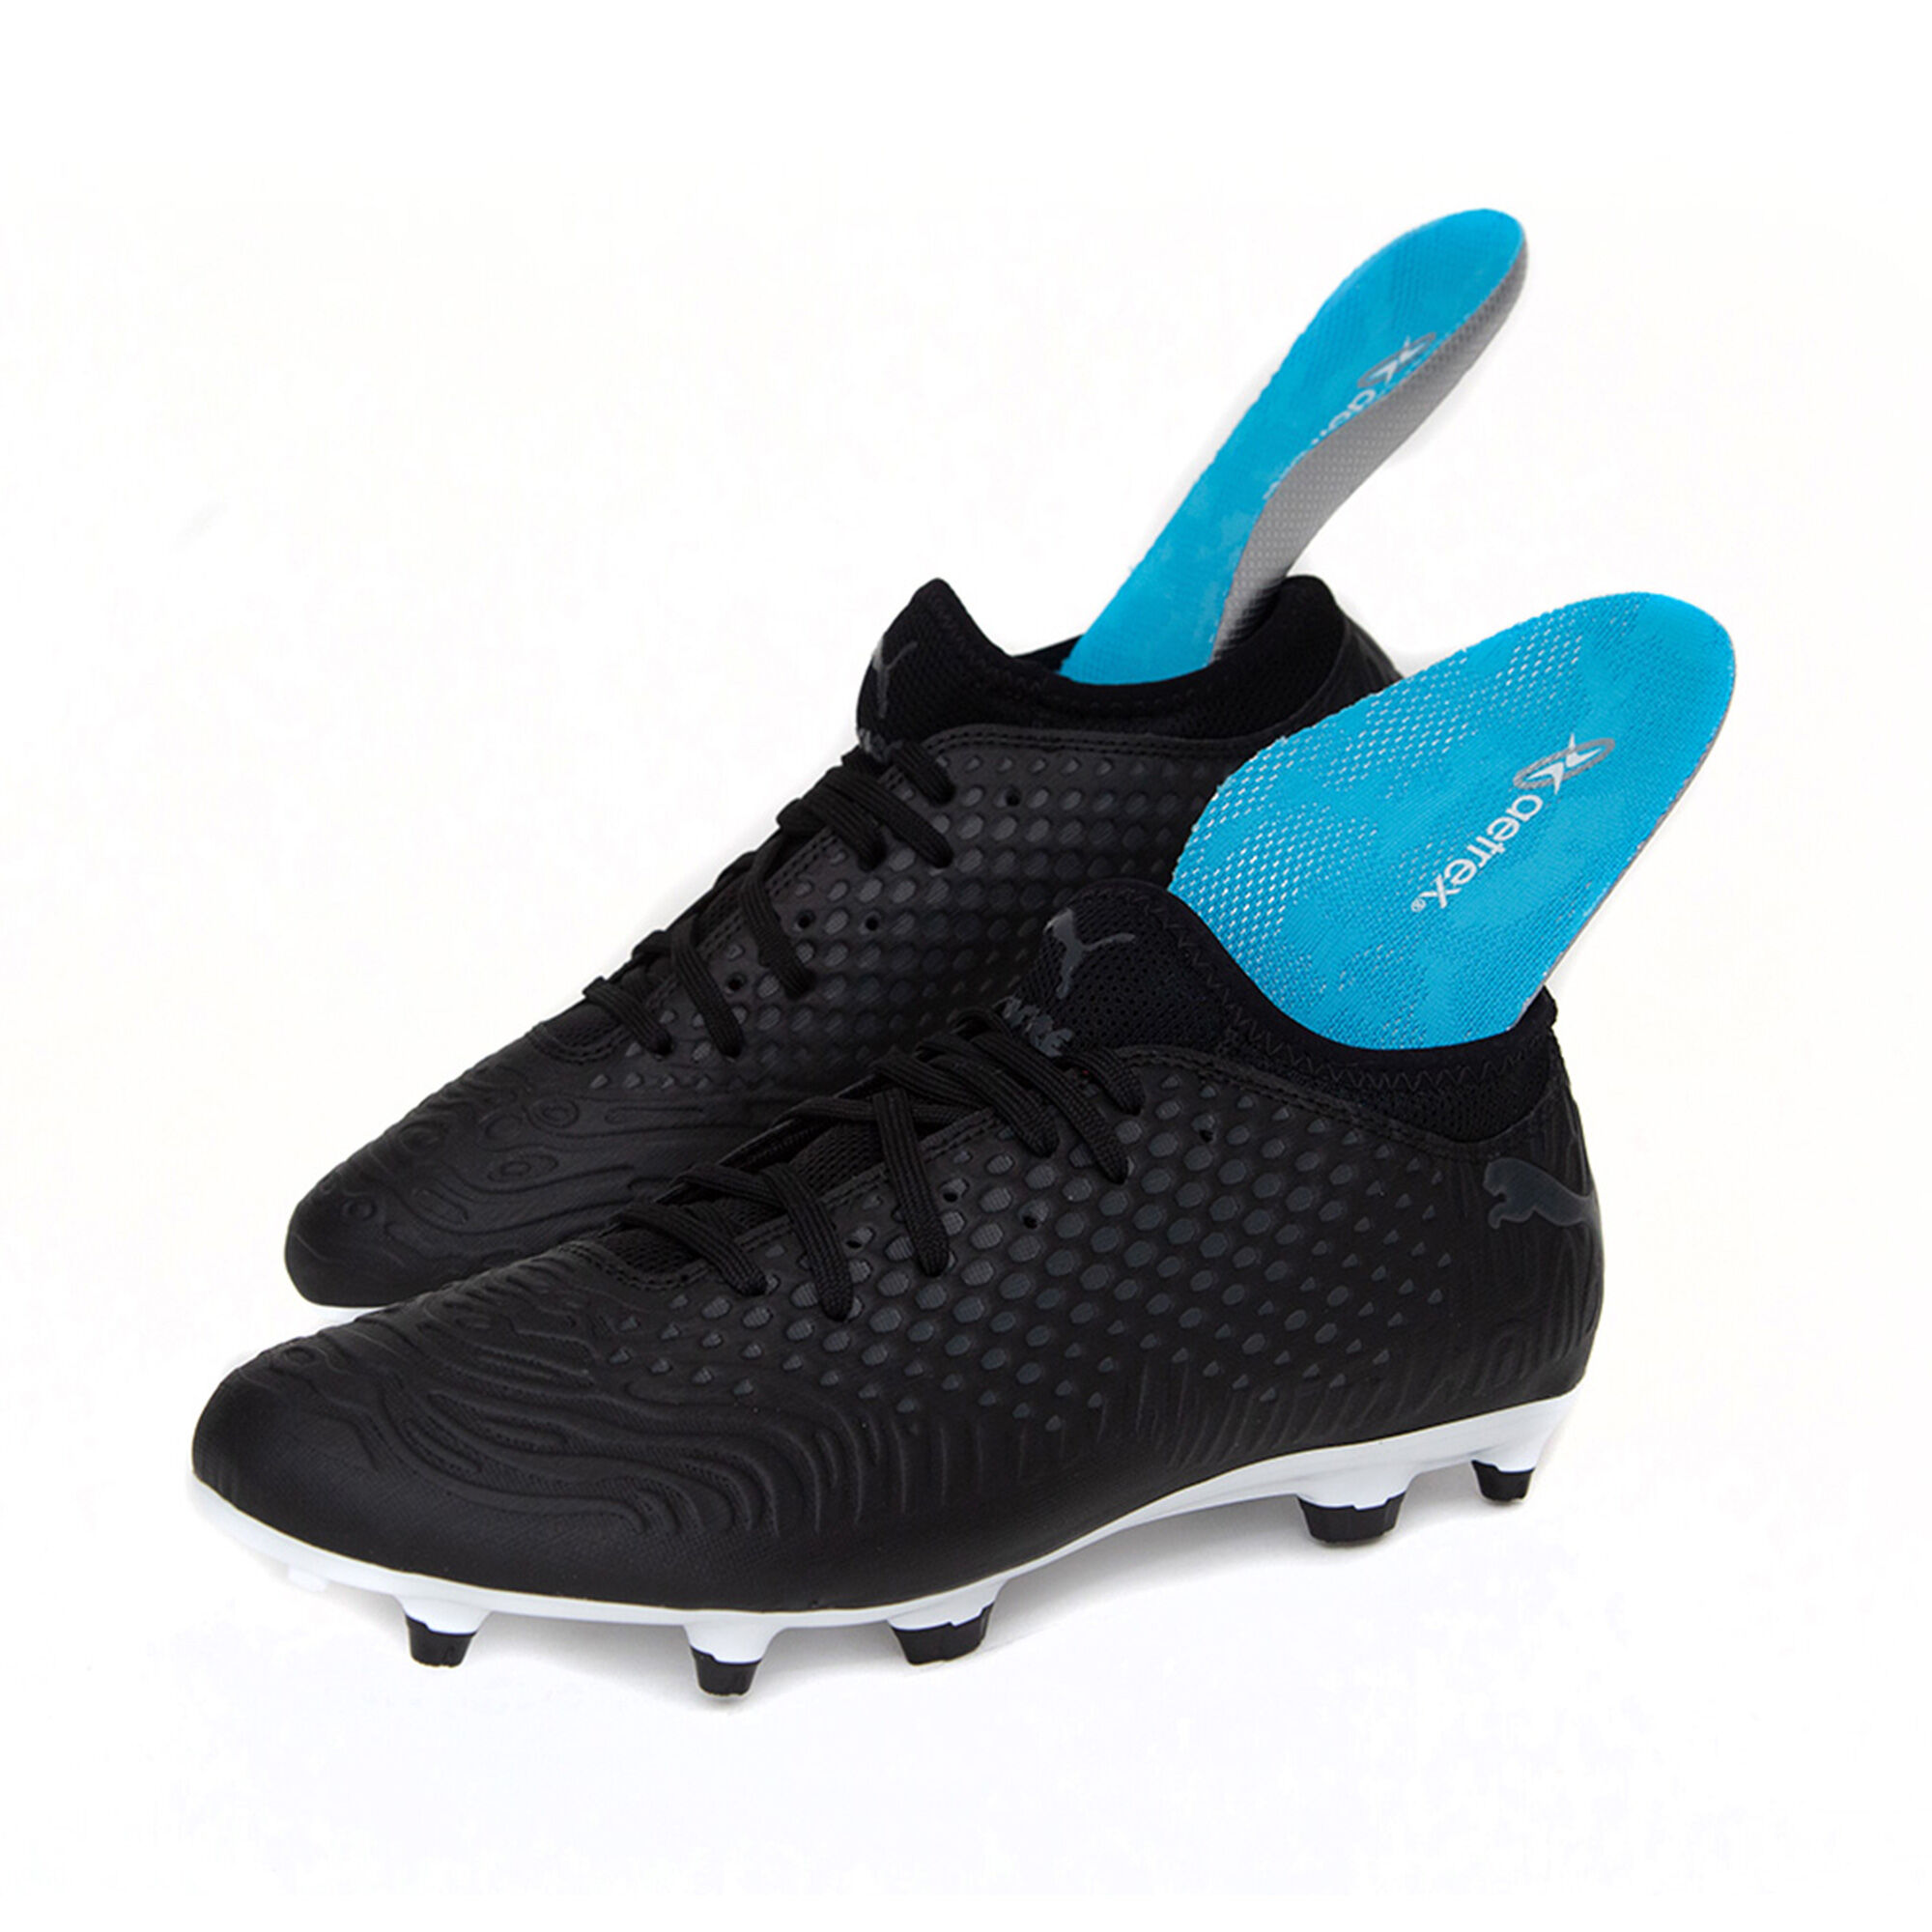 arch support soccer cleats